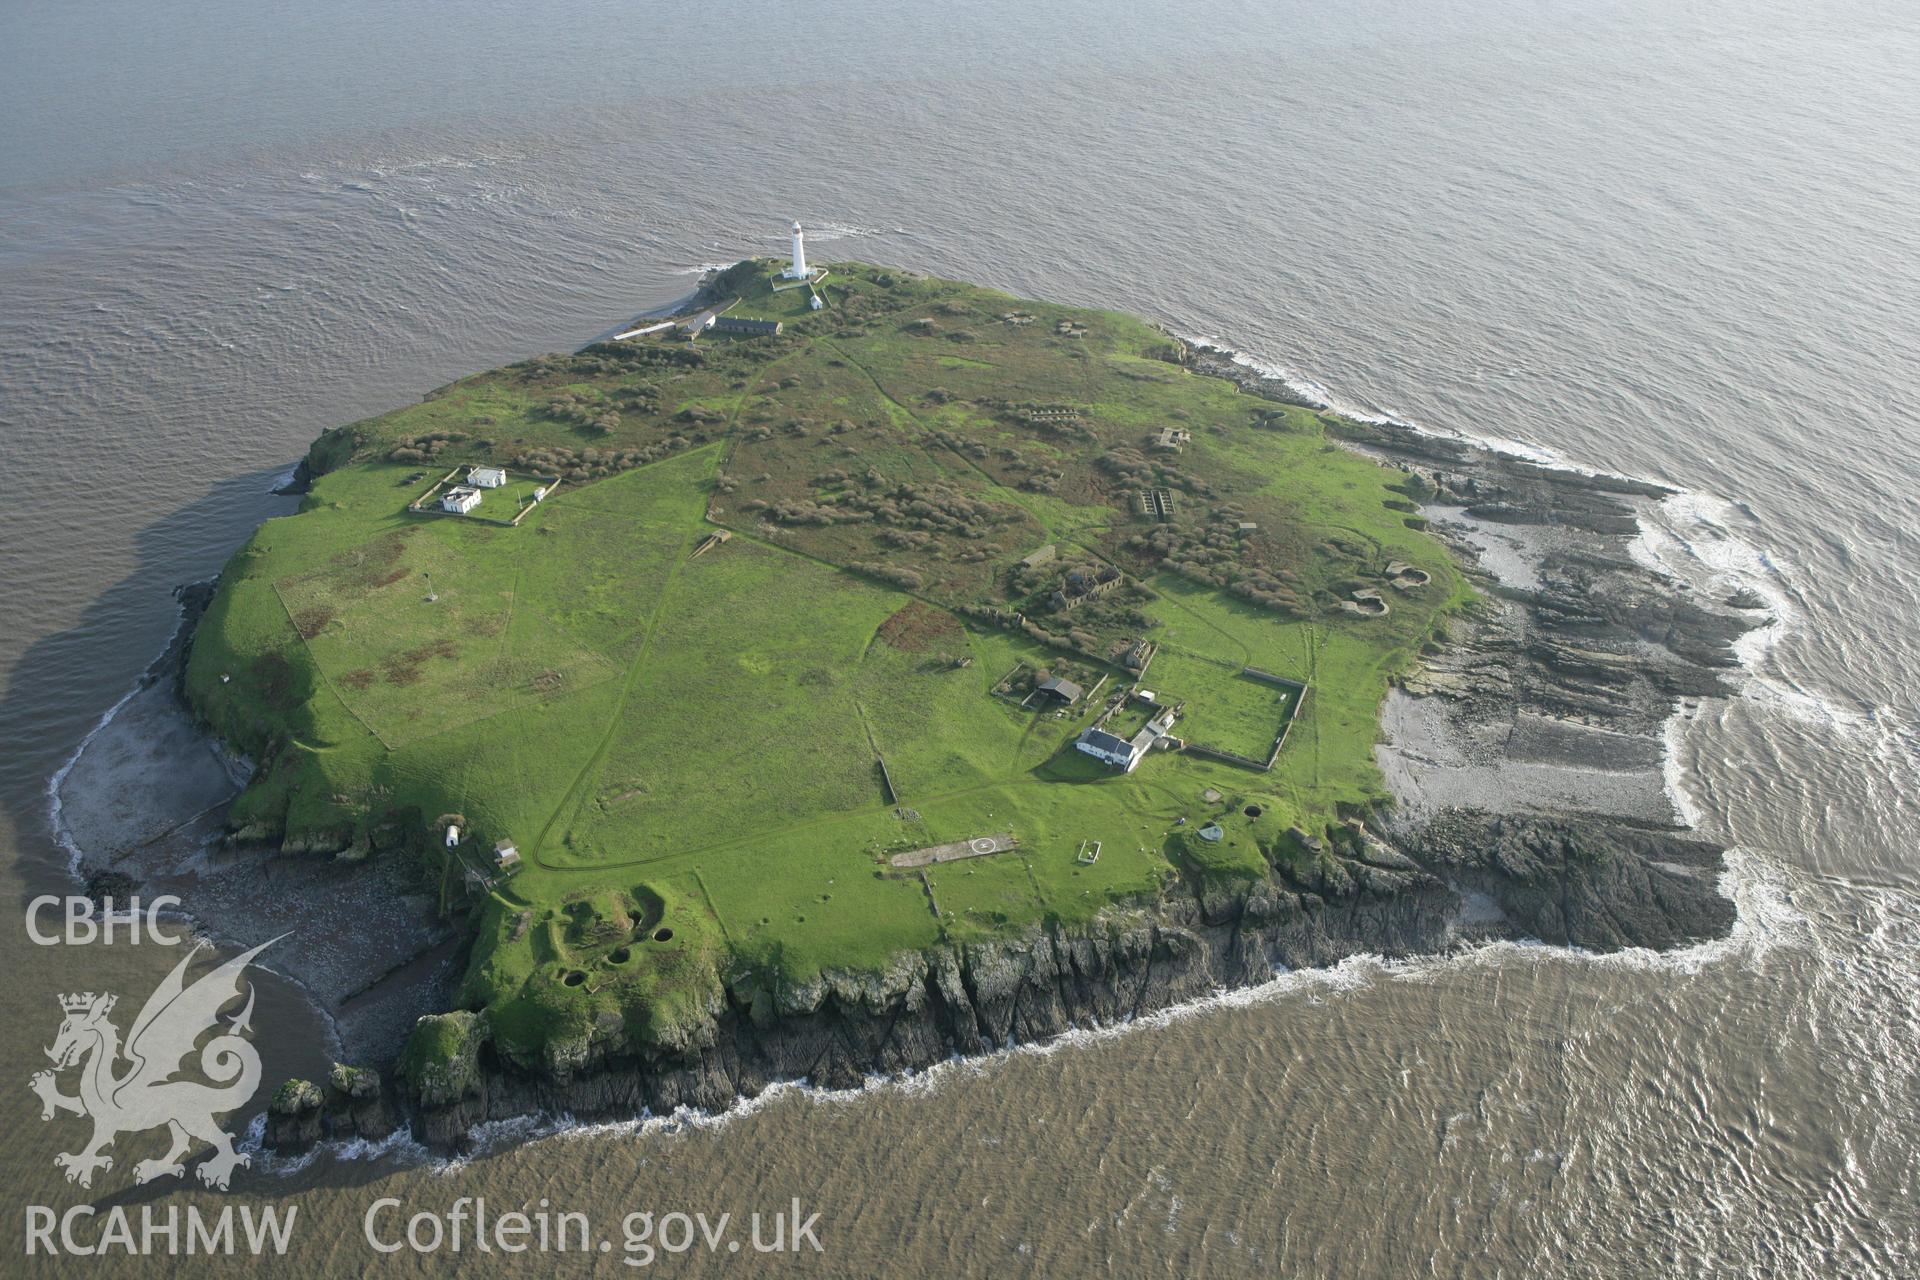 RCAHMW colour oblique photograph of Flat Holm. Taken by Toby Driver on 12/11/2008.